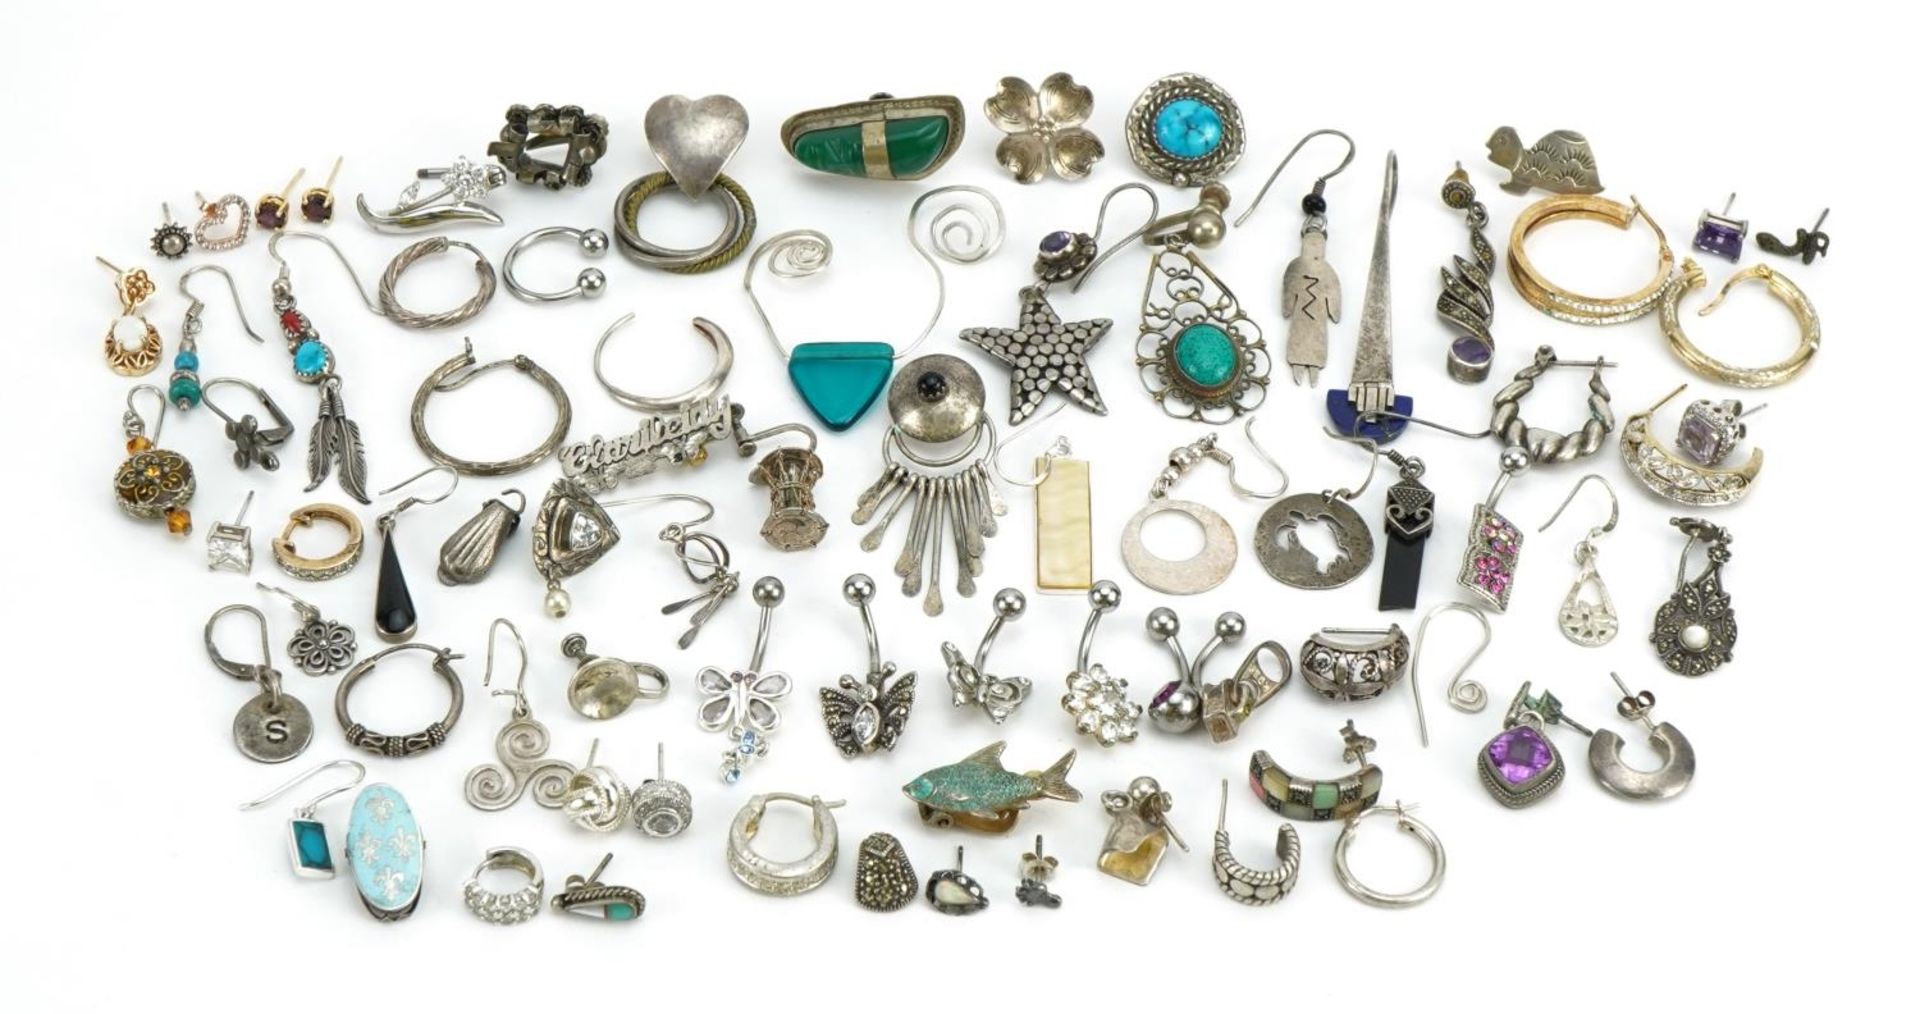 Vintage and later silver and white metal jewellery including earrings, pendants and blue enamel